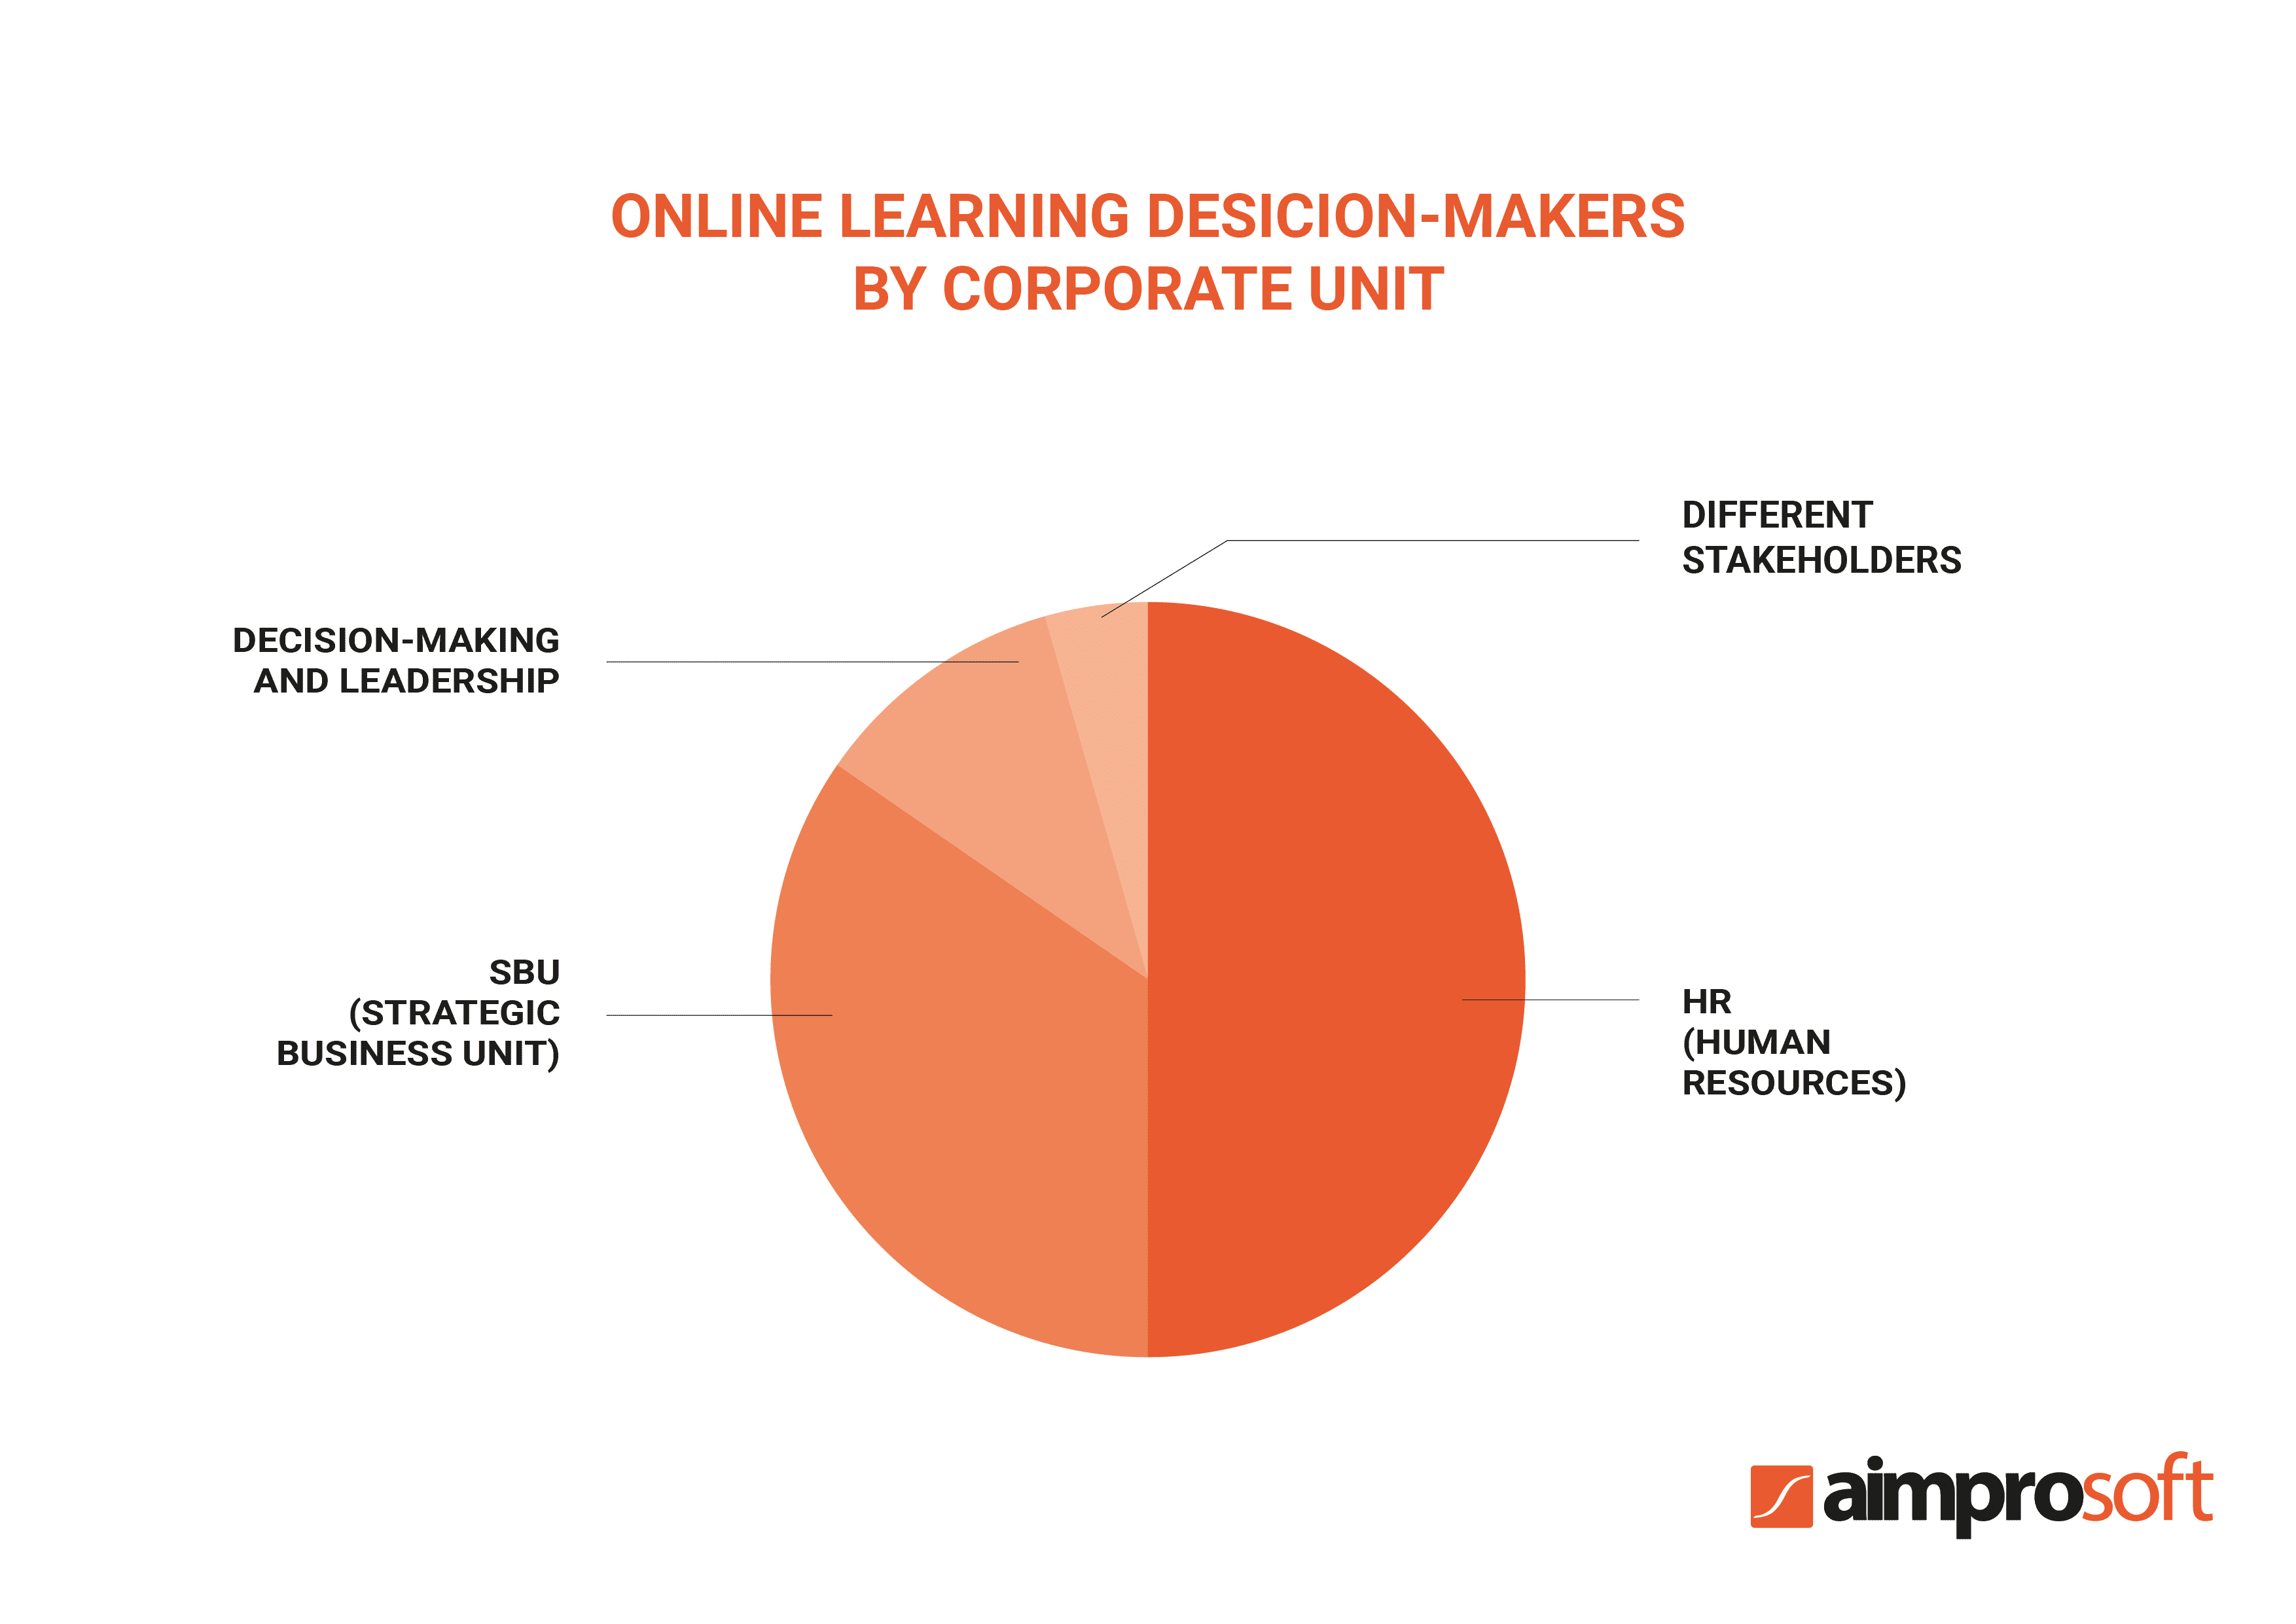 Online learning decision-makers by corporate unit